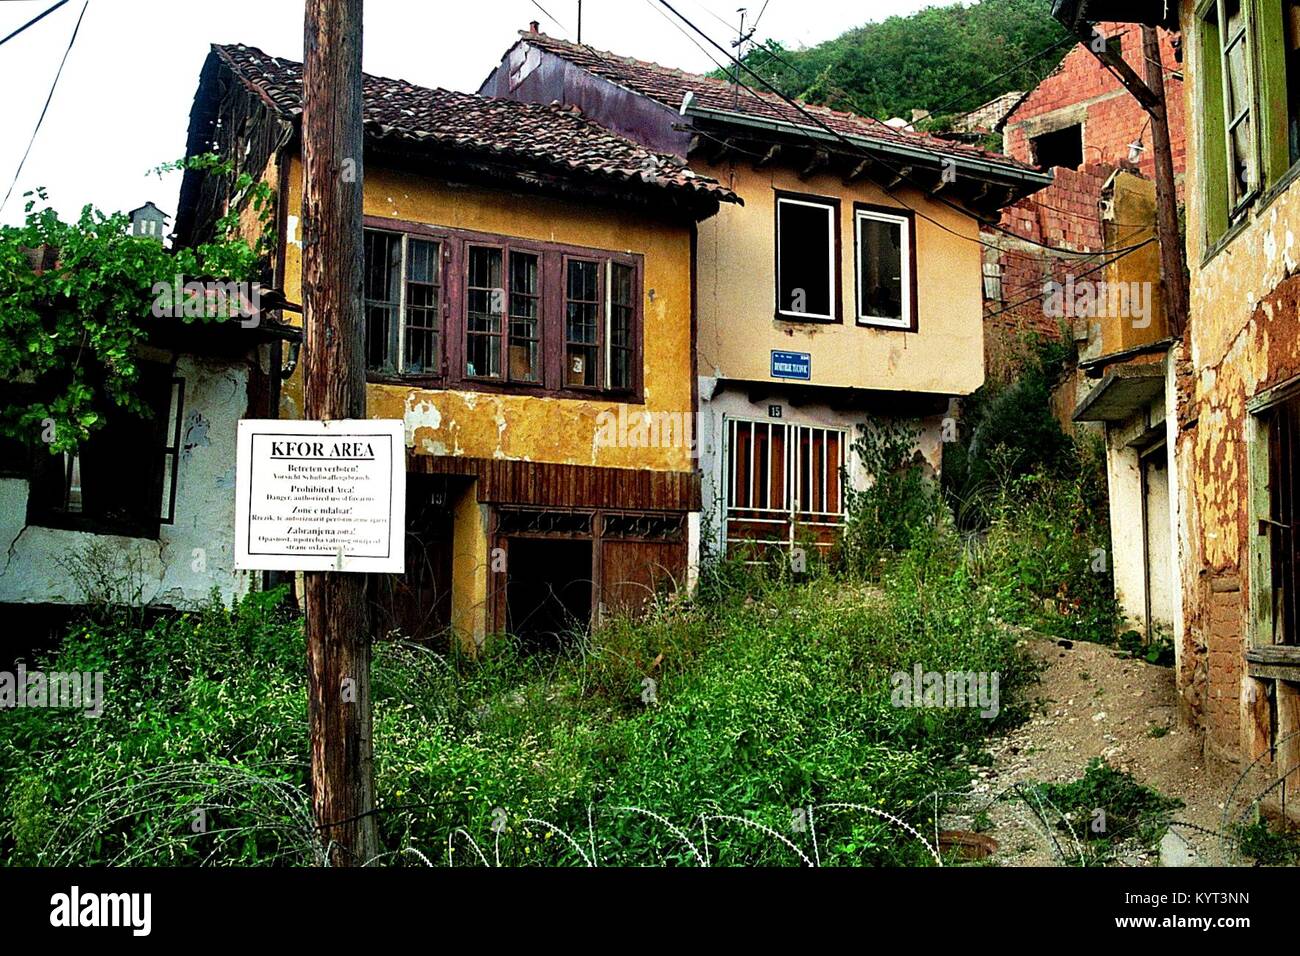 The medieval town of Prizren (Kosovo, until 2008 part of Serbia) survived the war of 1999 without heavier damage, but in 2004 the Serbian quarter Potkaljaja was destroyed and burnt down by a mob. Potkaljaja was a not accessible area under the protection of NATO/KFOR. The picture shows the entrance to the Serbian part in August 2006. Stock Photo